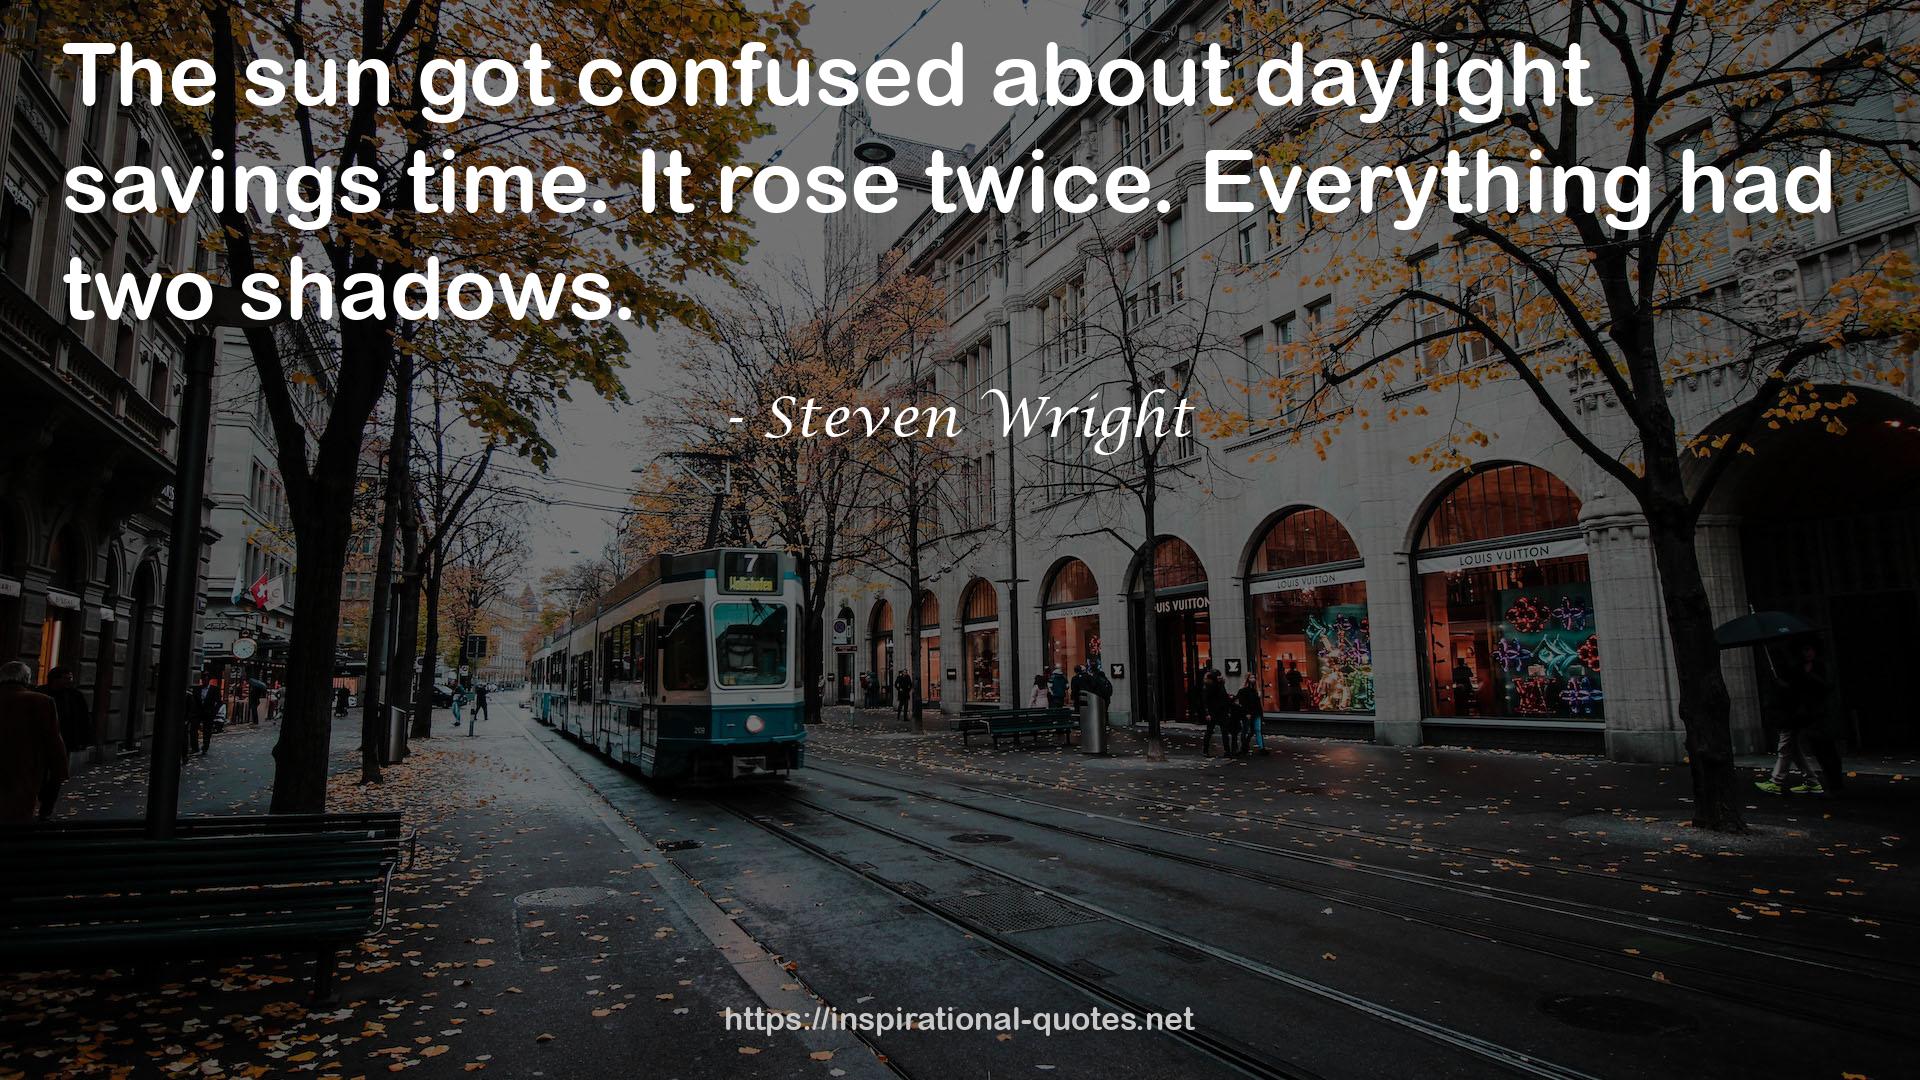 Steven Wright QUOTES